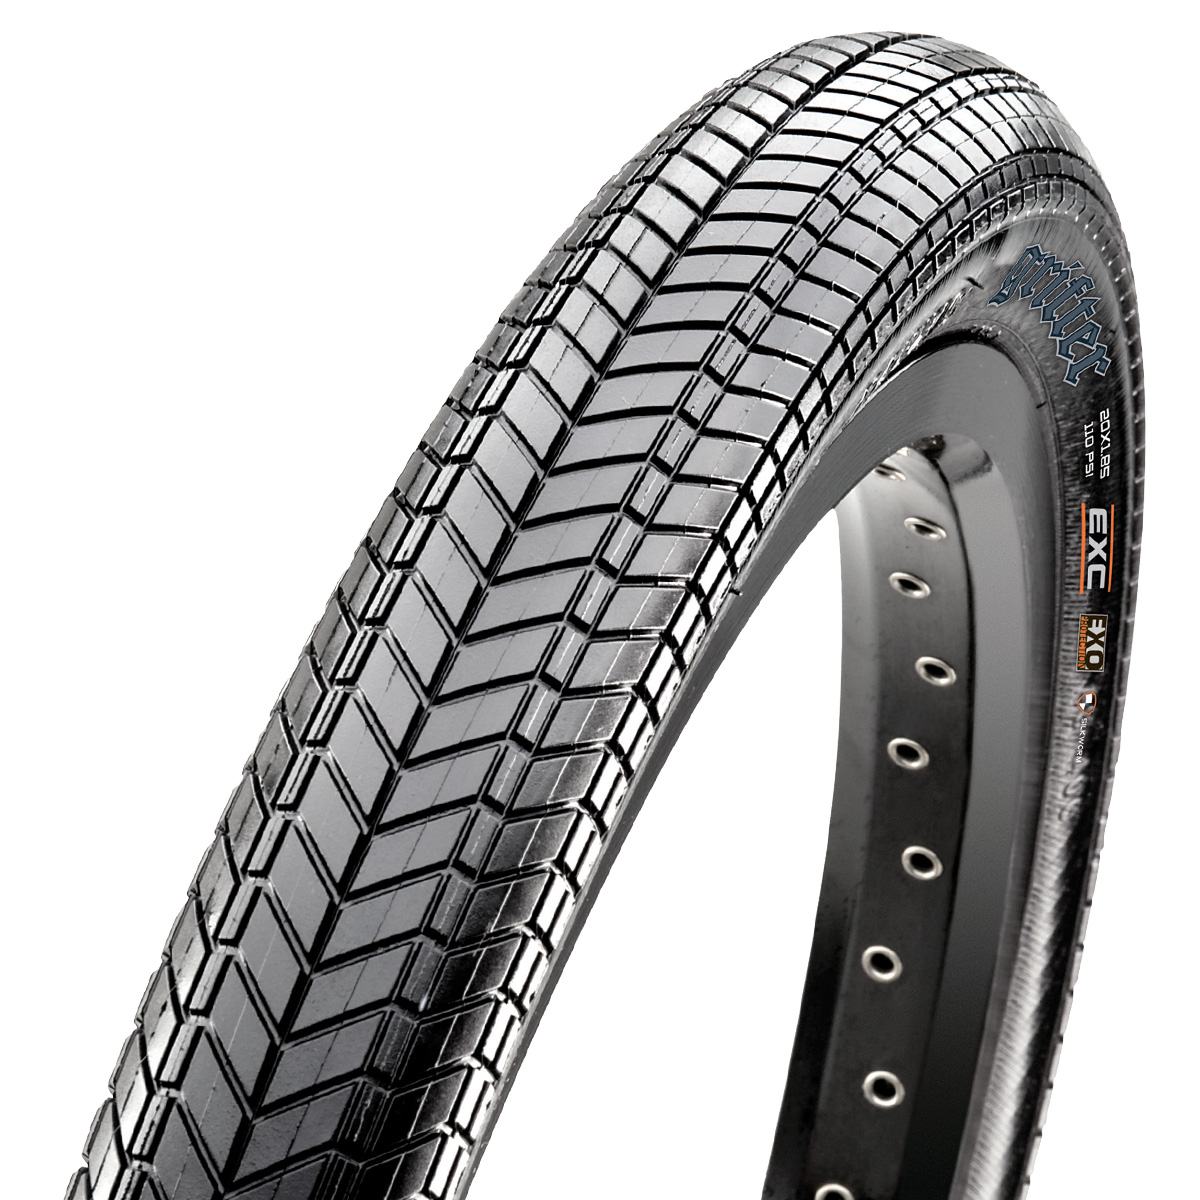 Покришка складна Maxxis 20x2.30 Grifter, 120TPI 